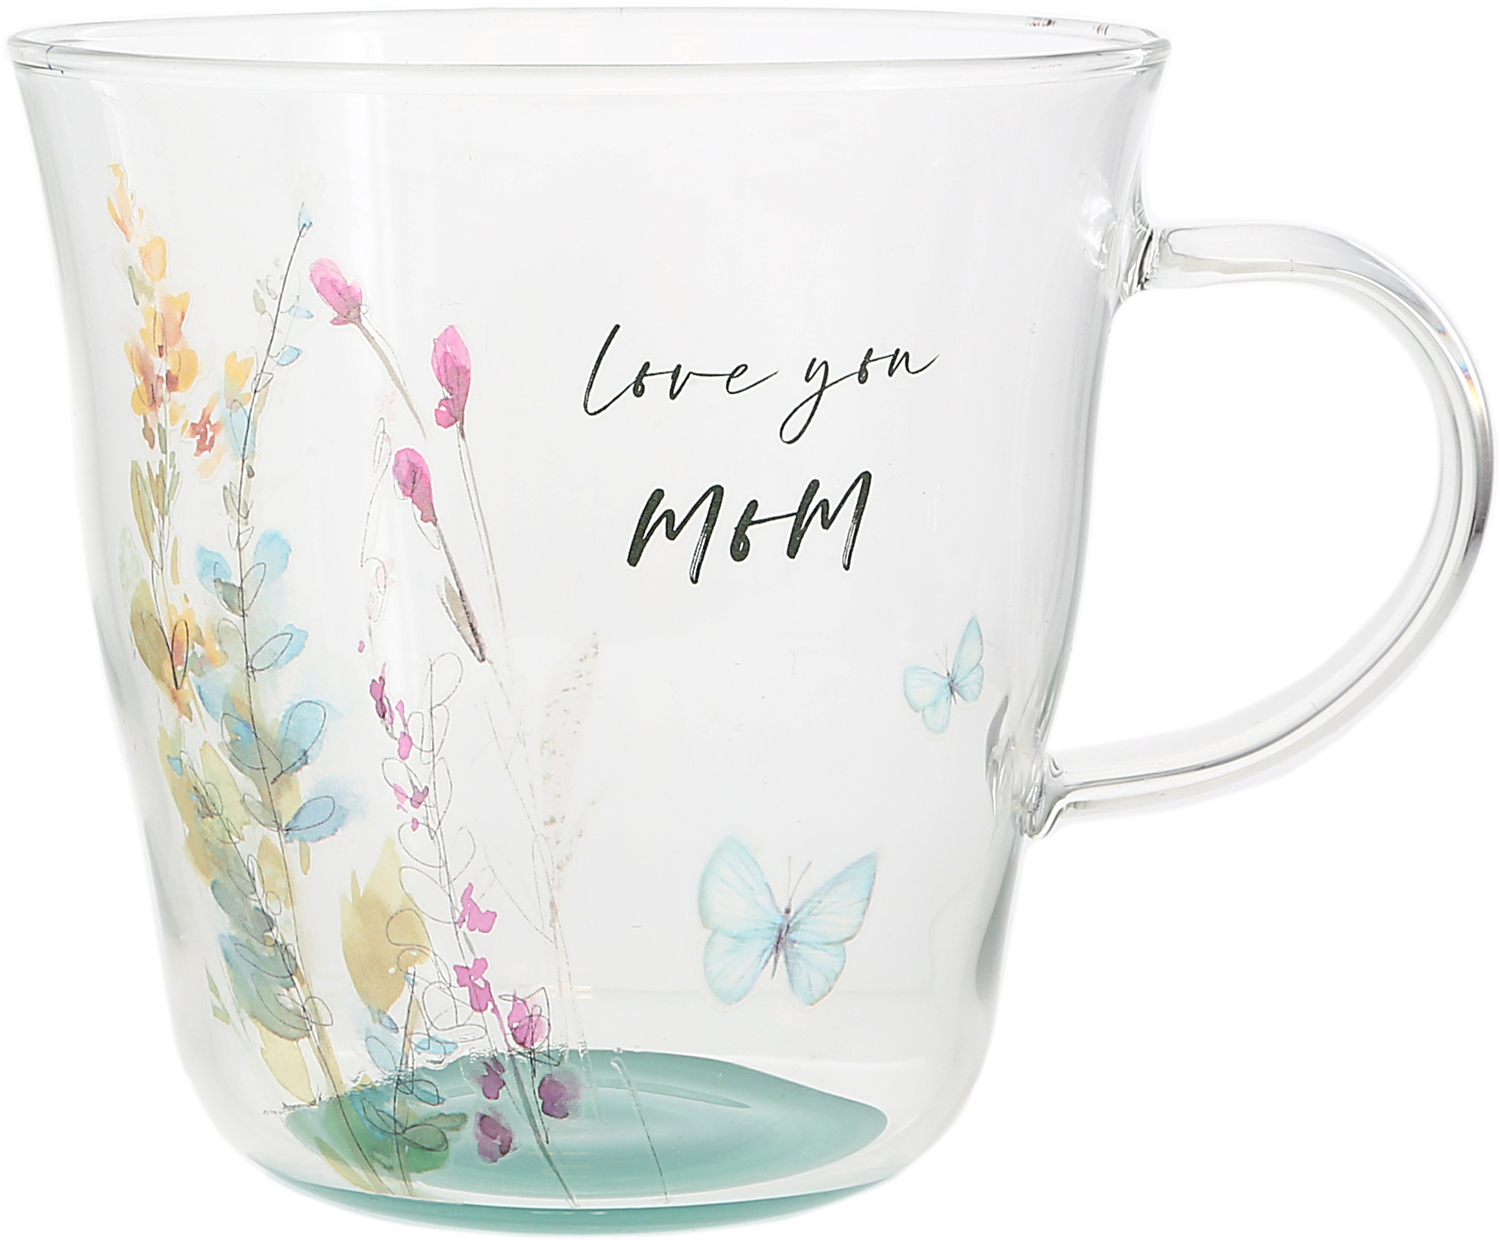 Love You Mom by Meadows of Joy - Love You Mom - 13.5 oz Glass Cup 